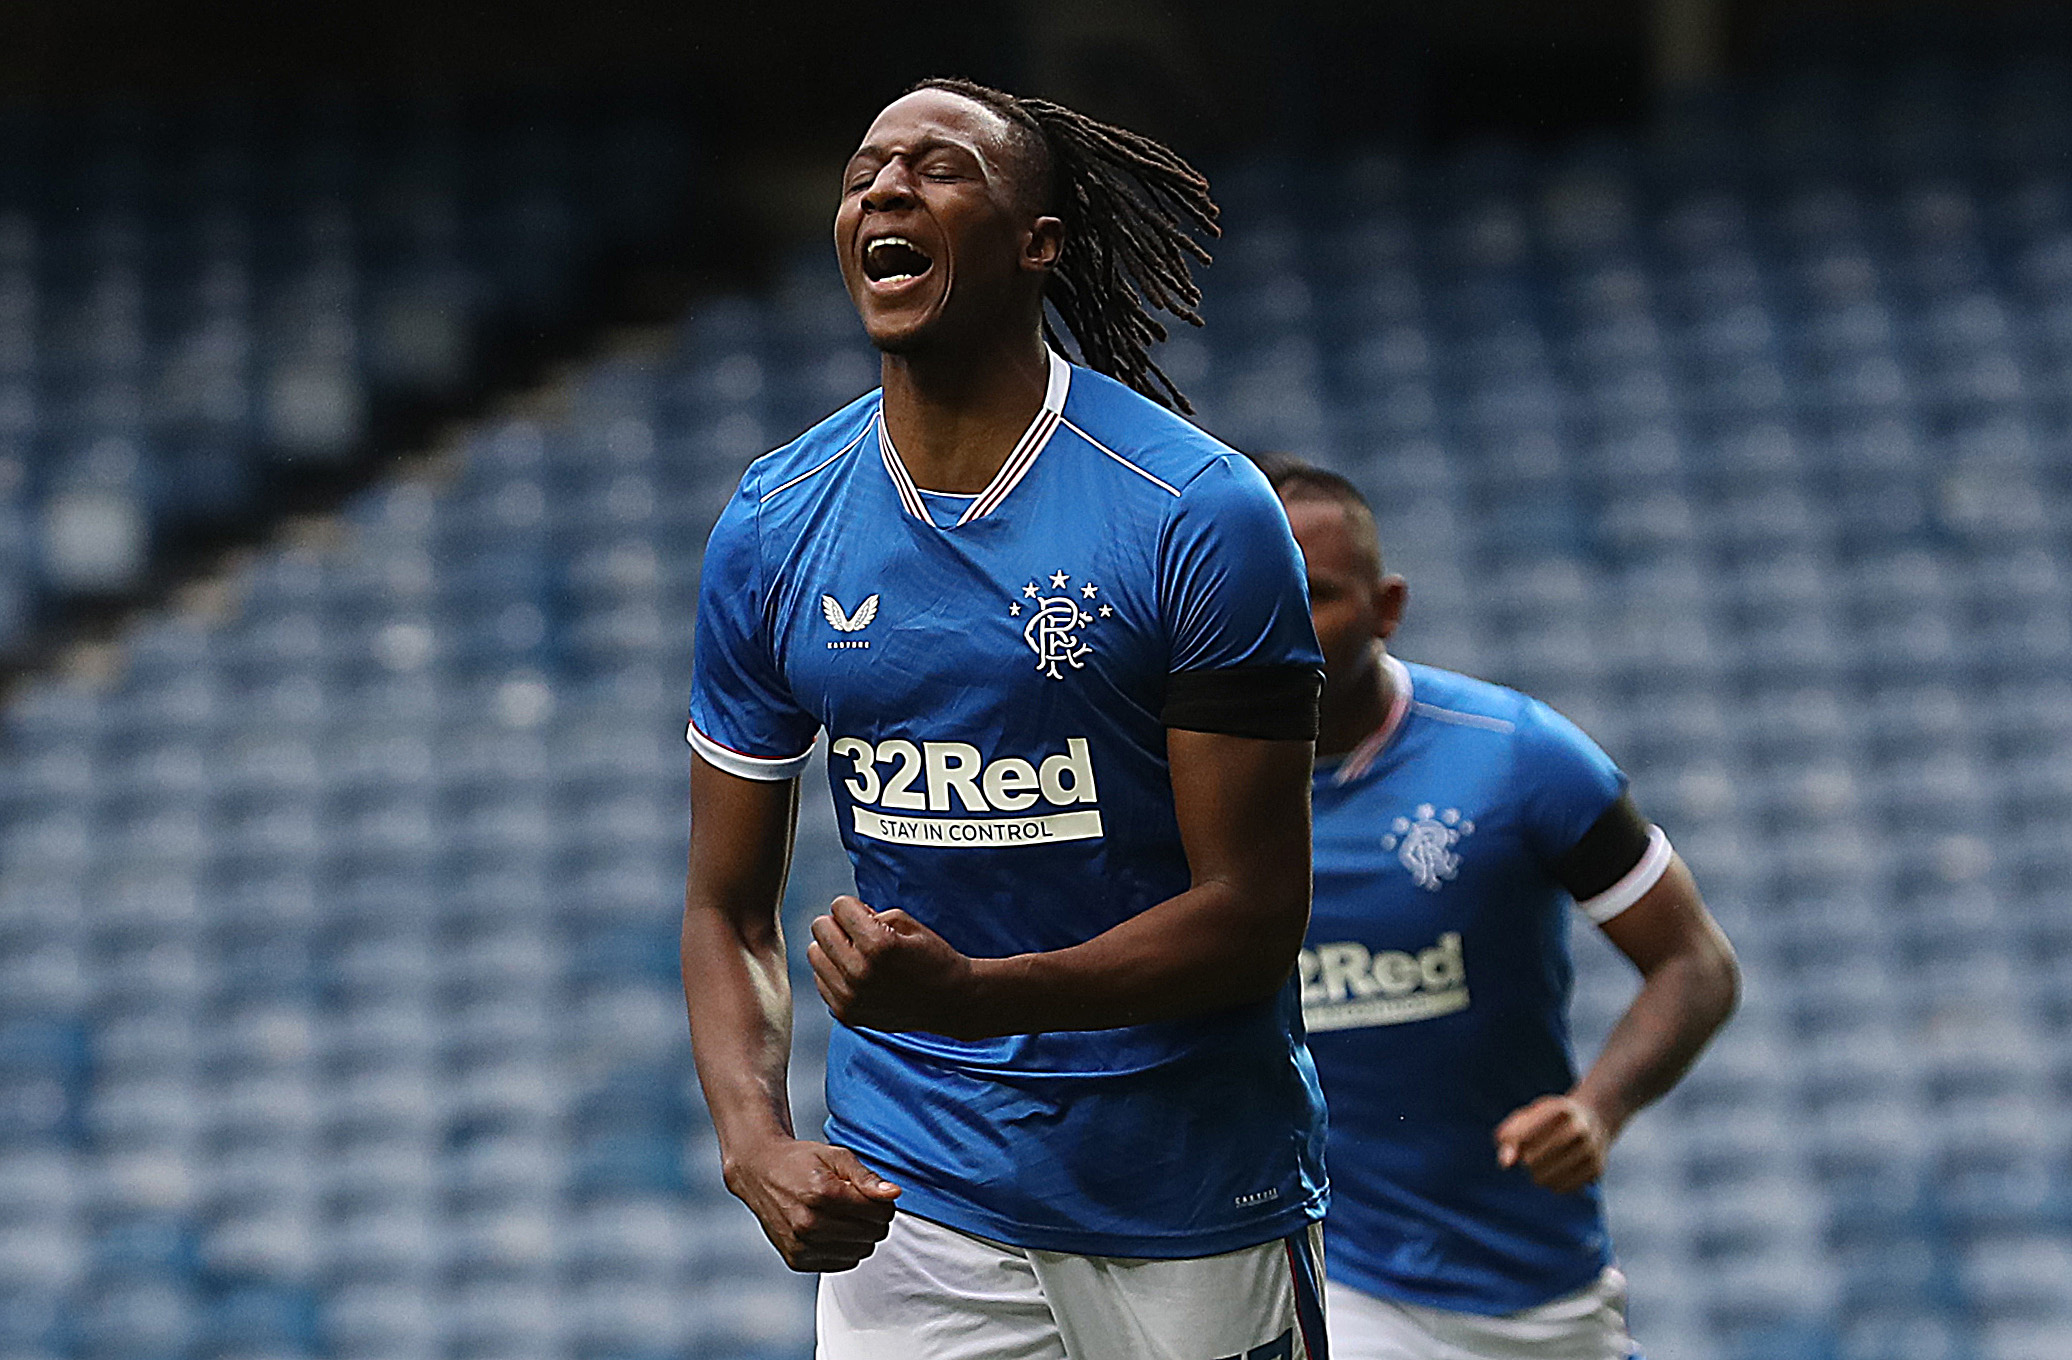 GLASGOW, SCOTLAND - JULY 25: Joe Aribo of Rangers celebrates after scoring the opening goal during the pre season friendly match between Rangers and Coventry City at Ibrox Stadium on July 25, 2020 in Glasgow, Scotland.